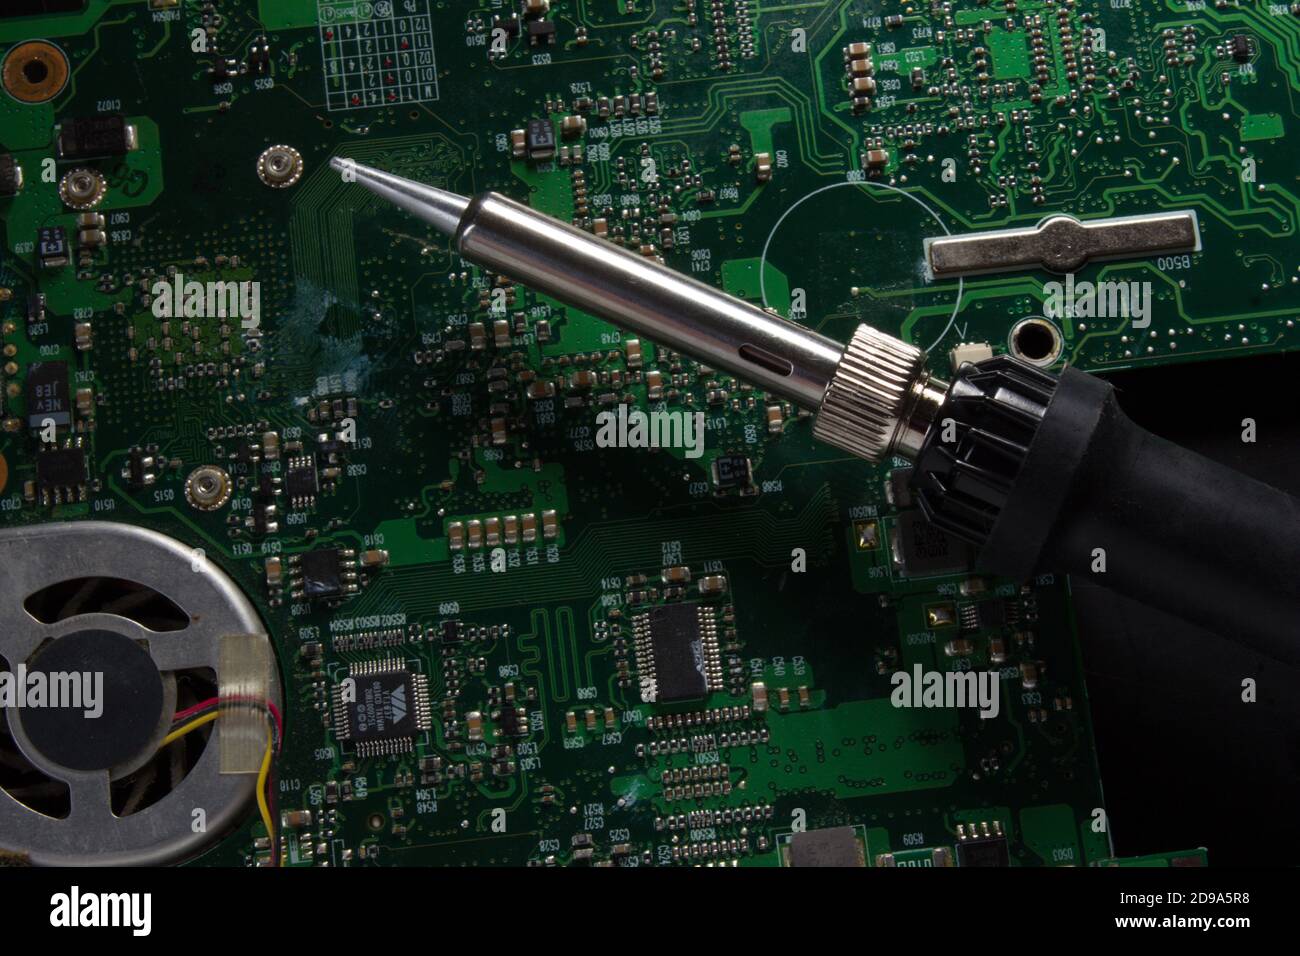 use a soldering iron to solder the electronic part to the Board. Computer  repair. Macrophotography Stock Photo - Alamy